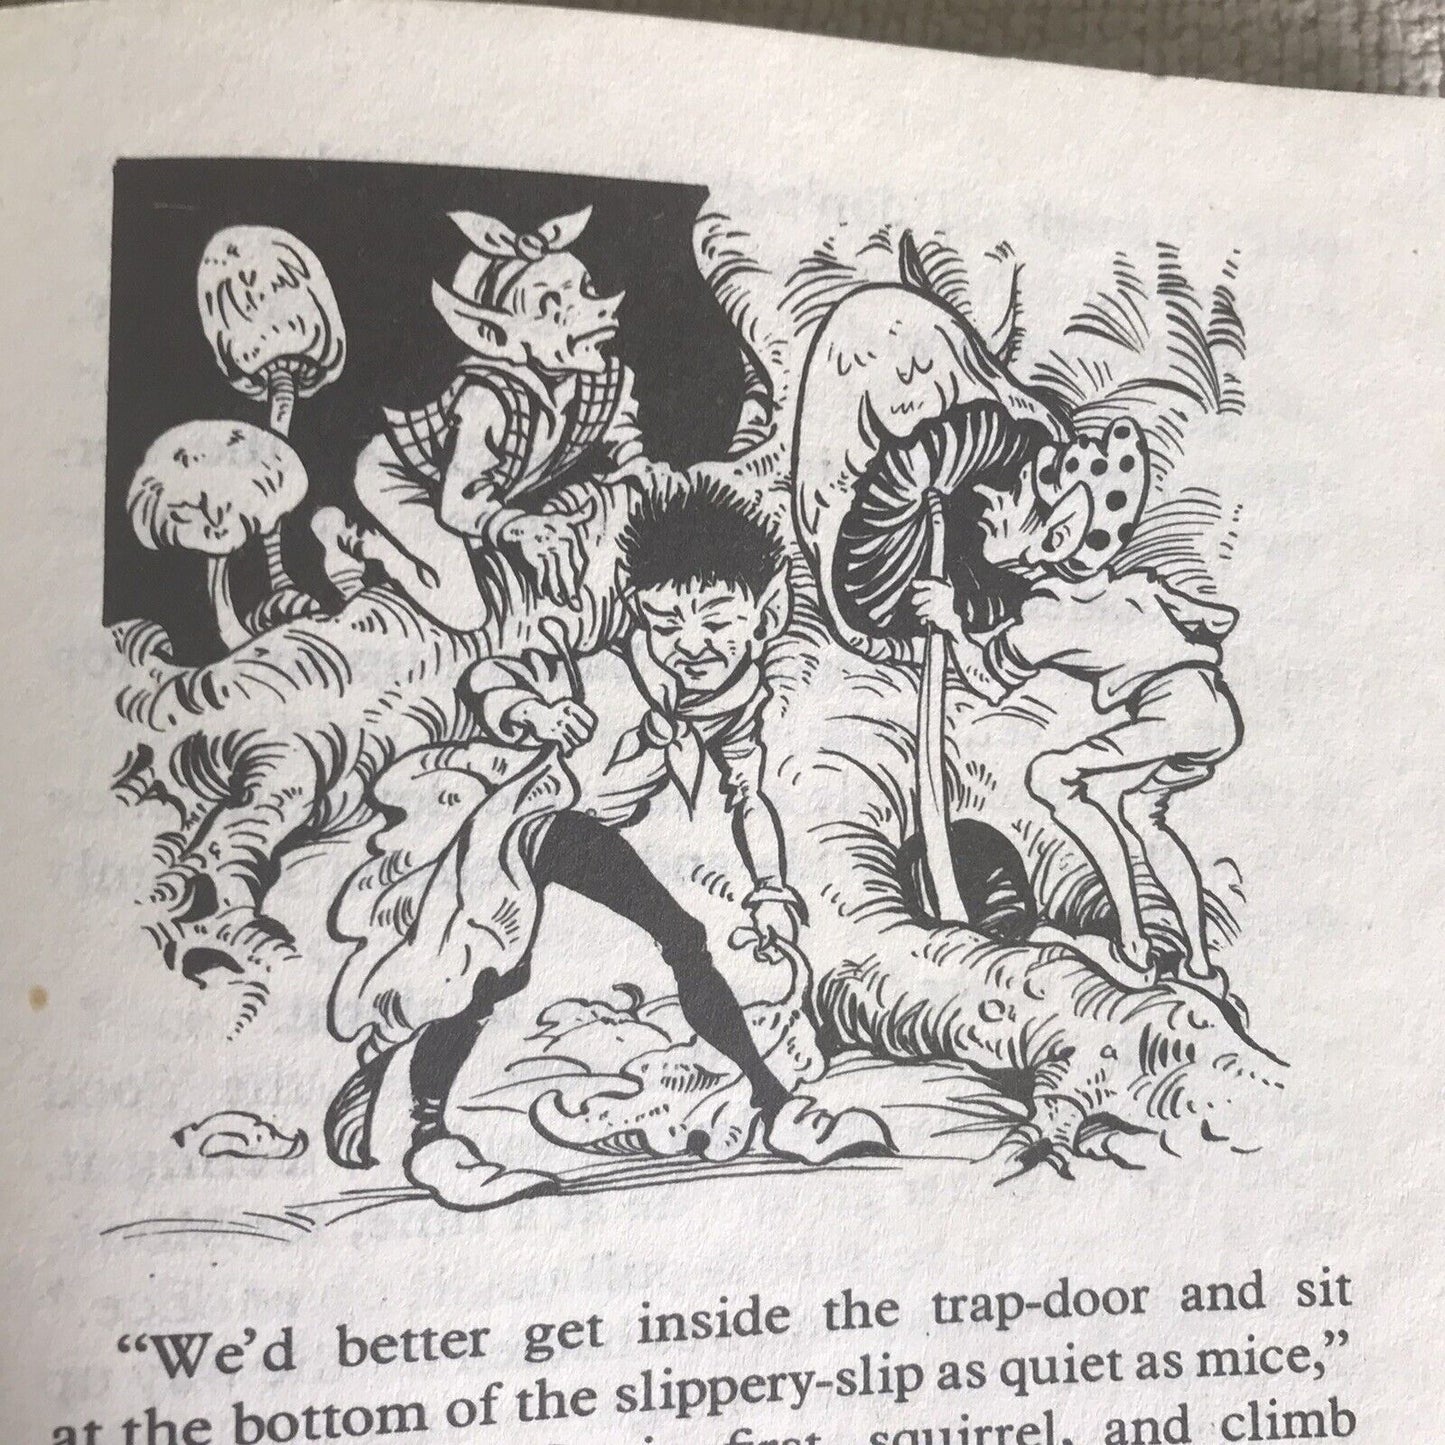 THE ENCHANTED WOOD by Enid Blyton, published by Dean & Son Ltd 1971